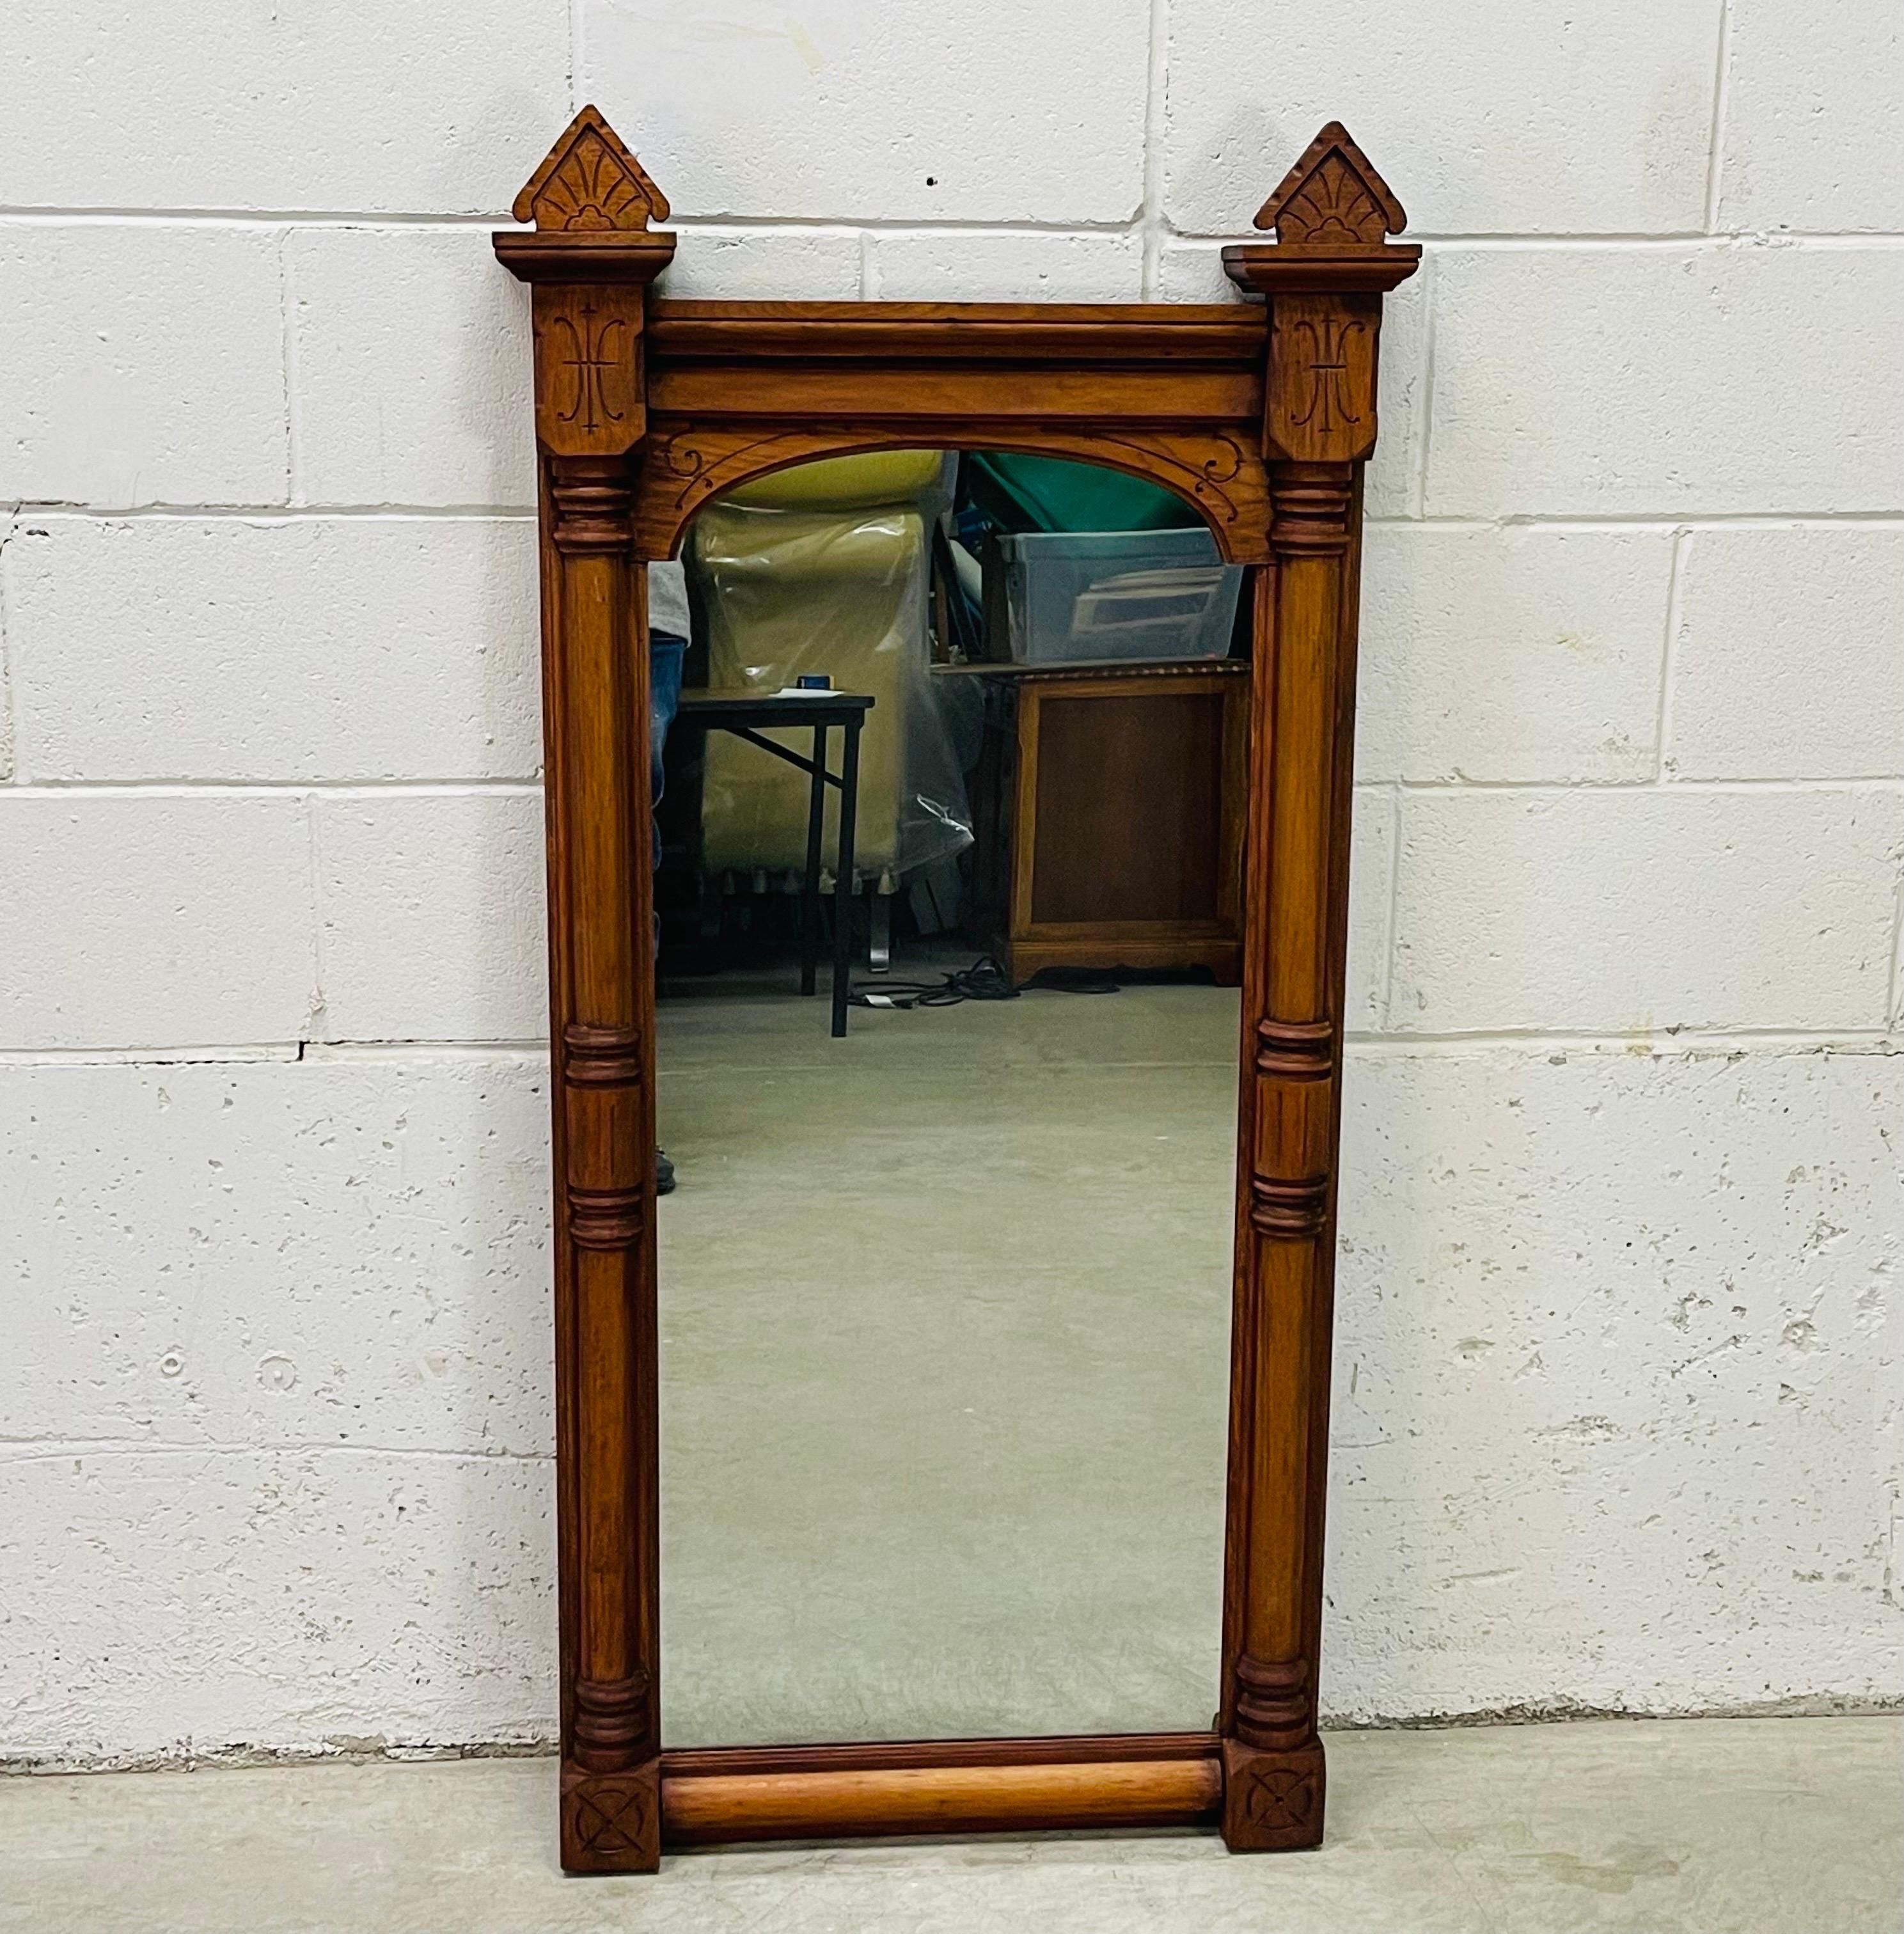 Antique East Lake style victorian black walnut hand carved large wall mirror. Intrique carved details over the entire mirror. Original mirror. Newly refinished condition. Hardware included.